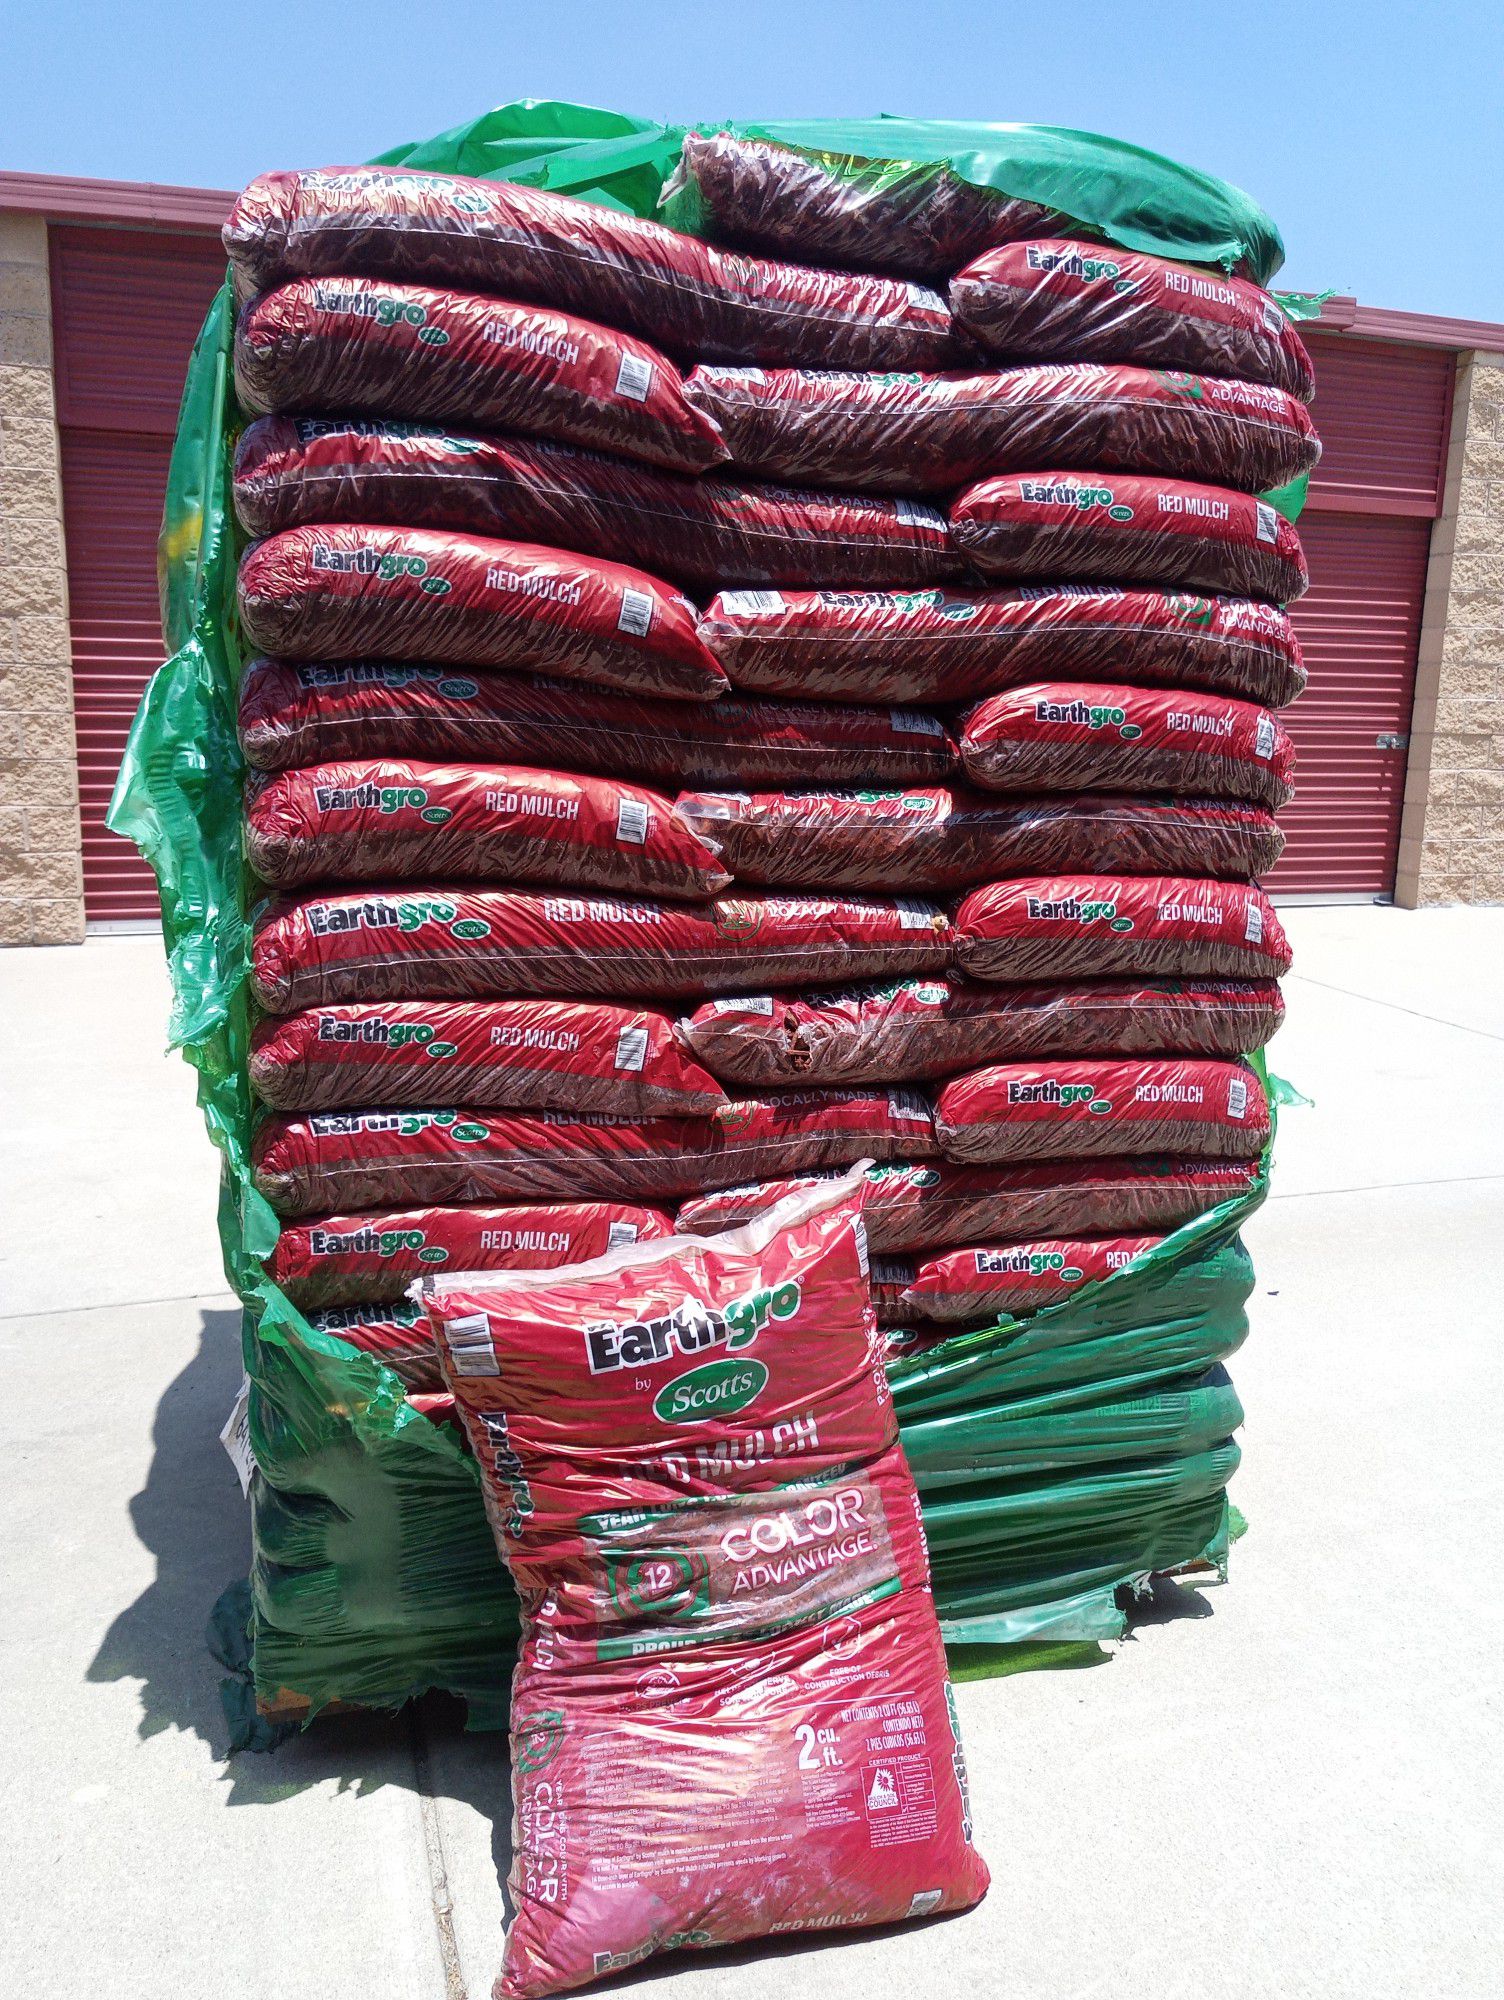 NEW 2 CUBIC FOOT SCOTT'S RED MULCH BAGS !! $3.00 EACH BAG!! OR TAKE ALL 60 BAGS FOR $140 FIRM !!!!